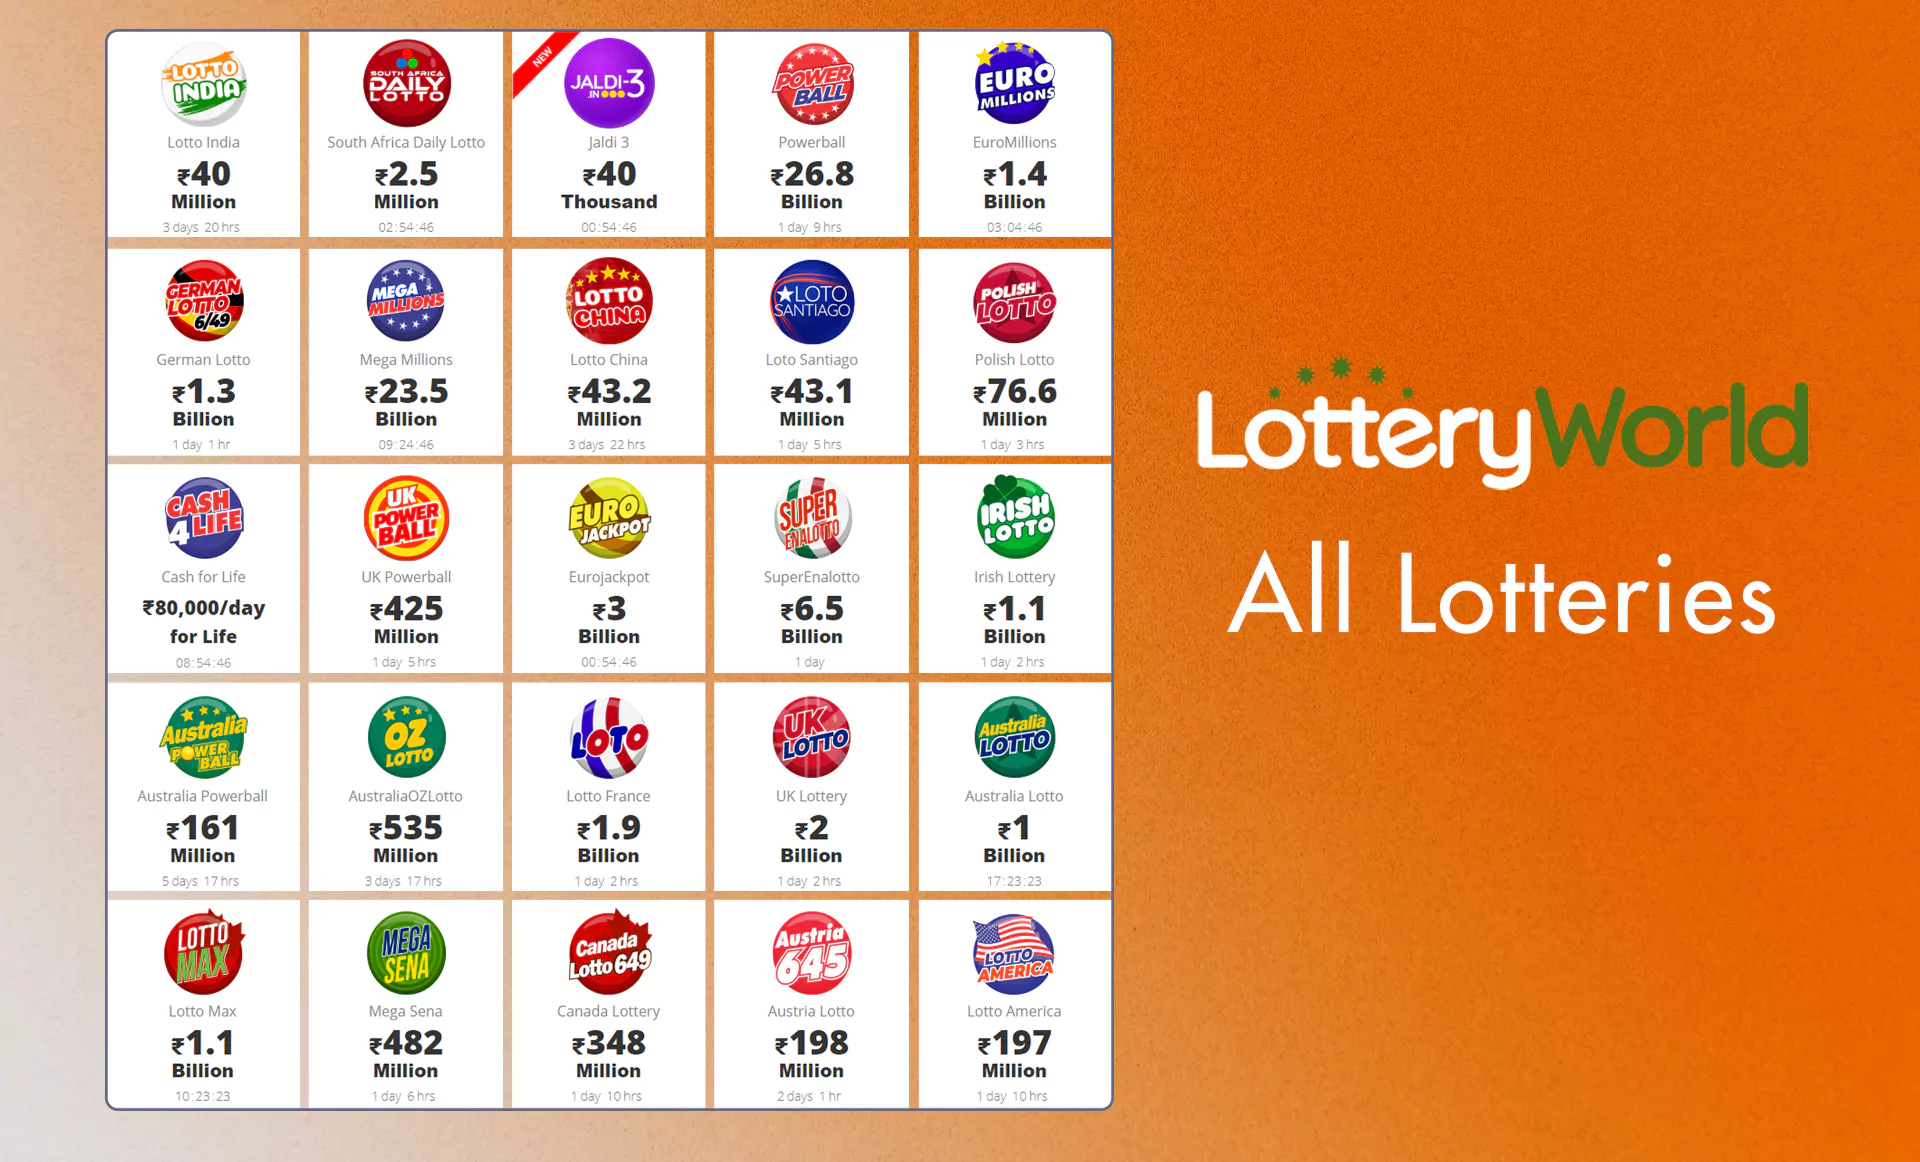 There are also many other lotteries on the site you can buy tickets for.